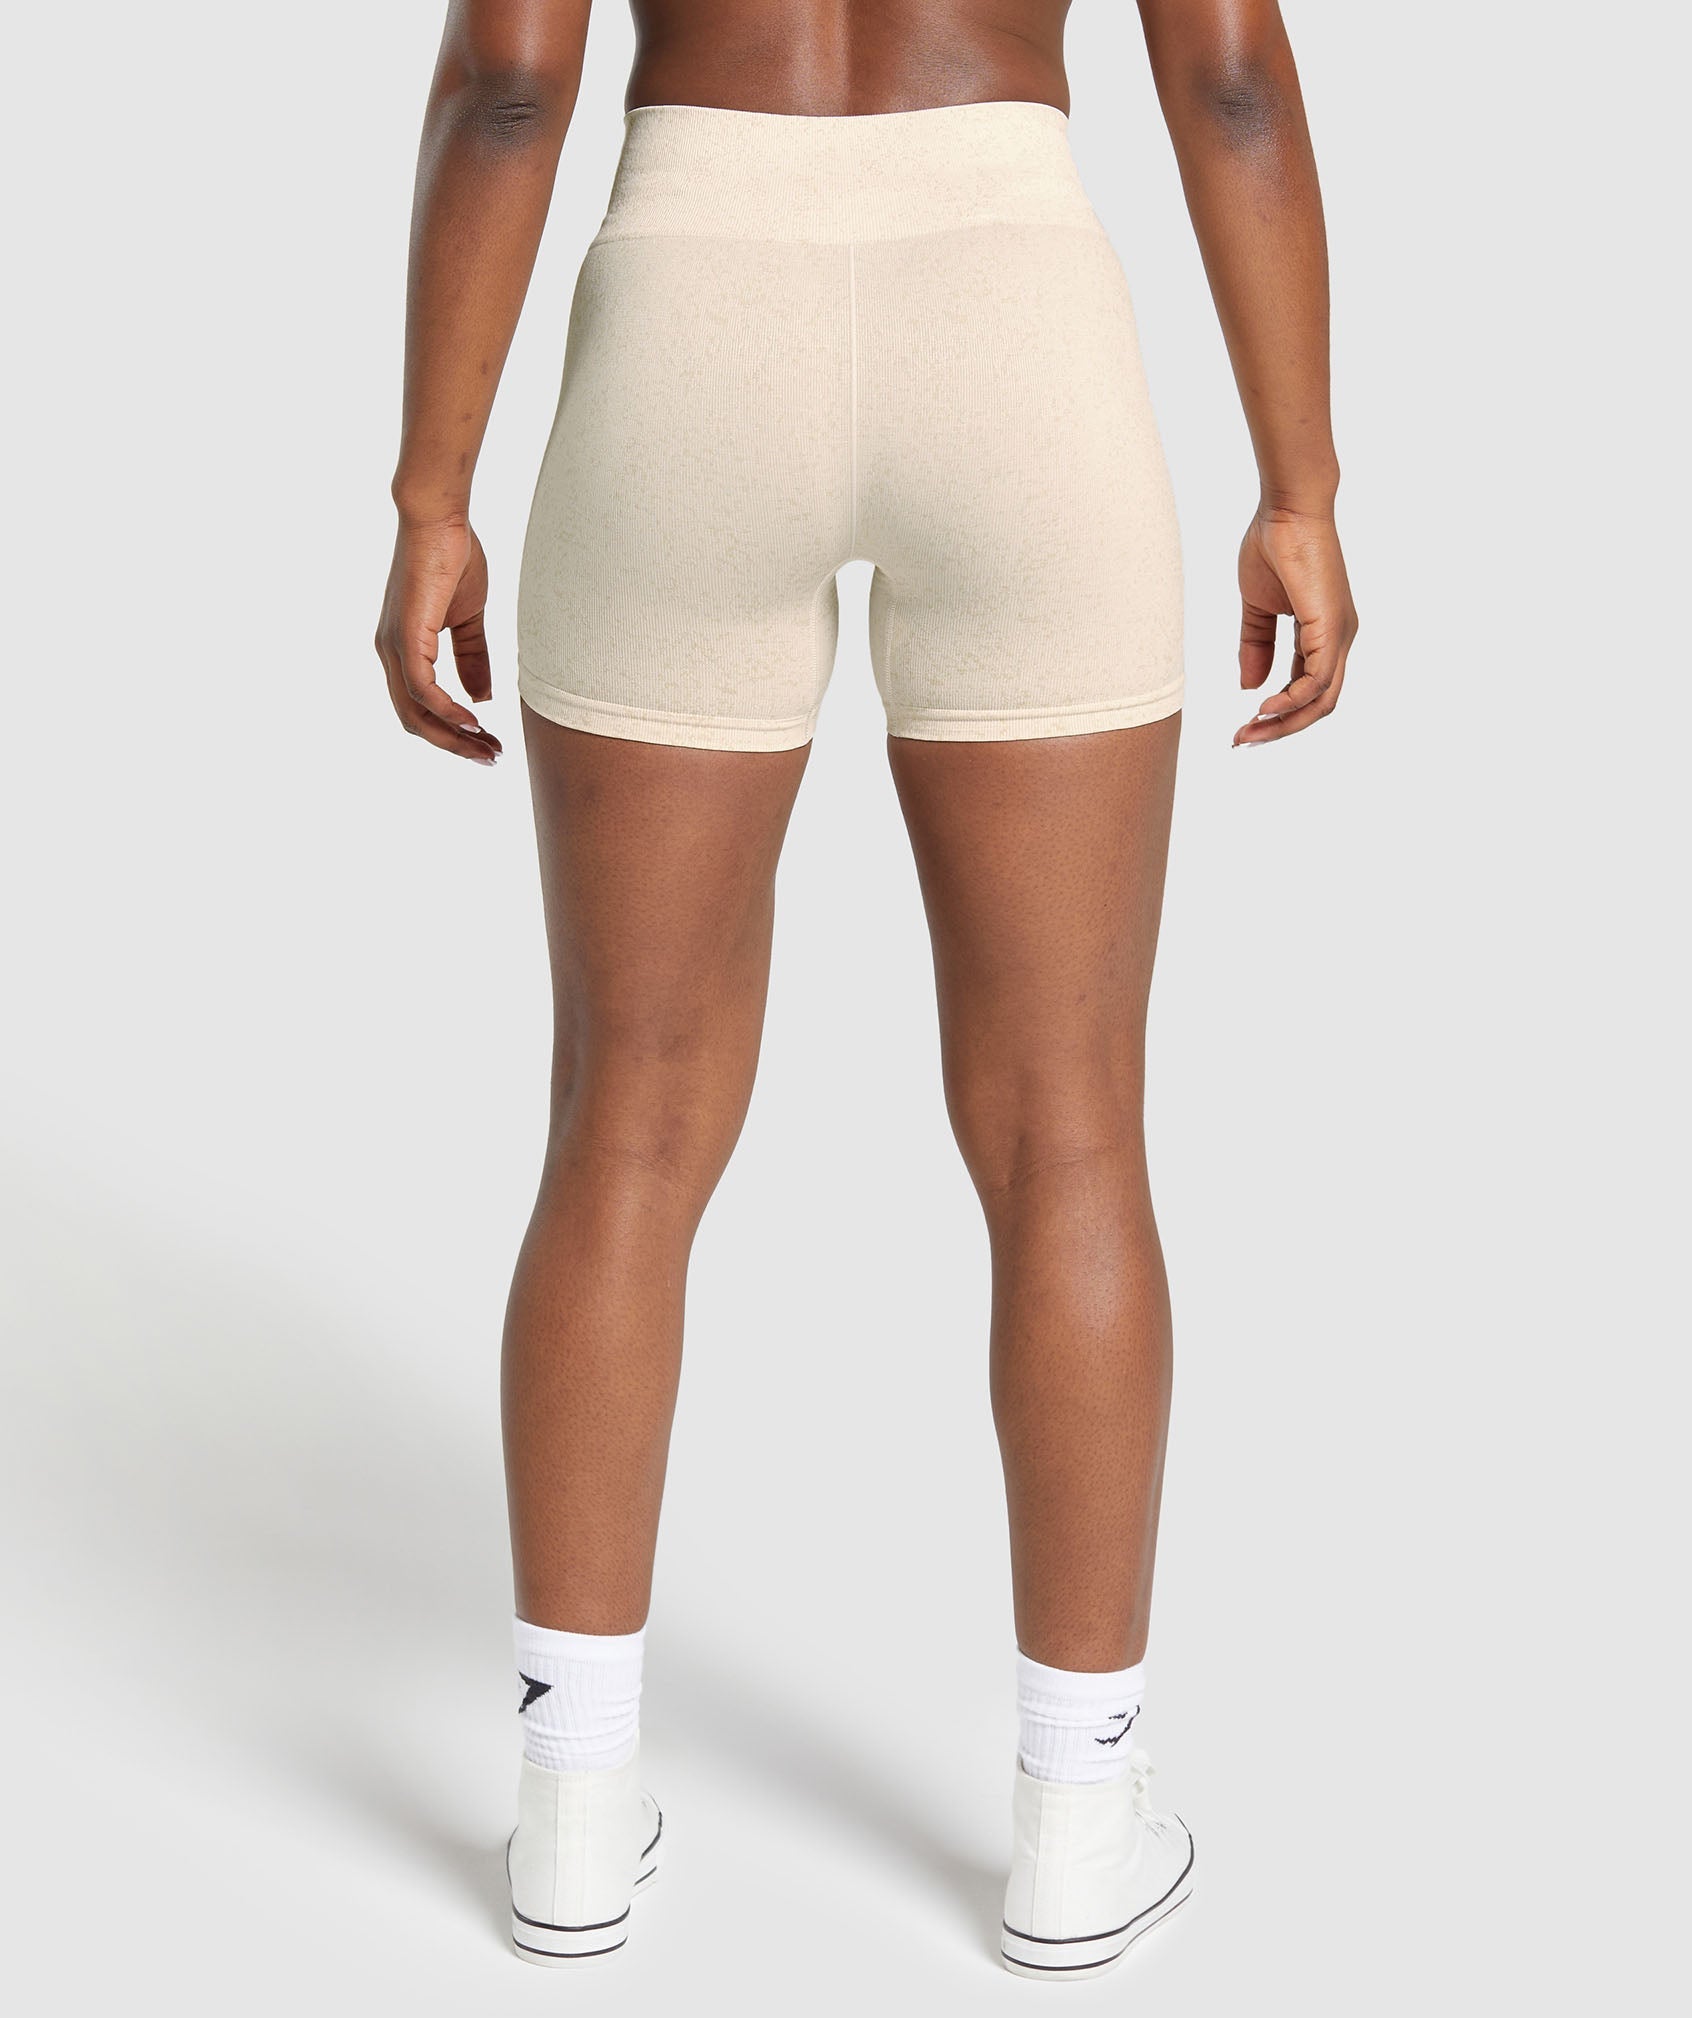 Adapt Fleck Seamless Shorts in Coconut White - view 2